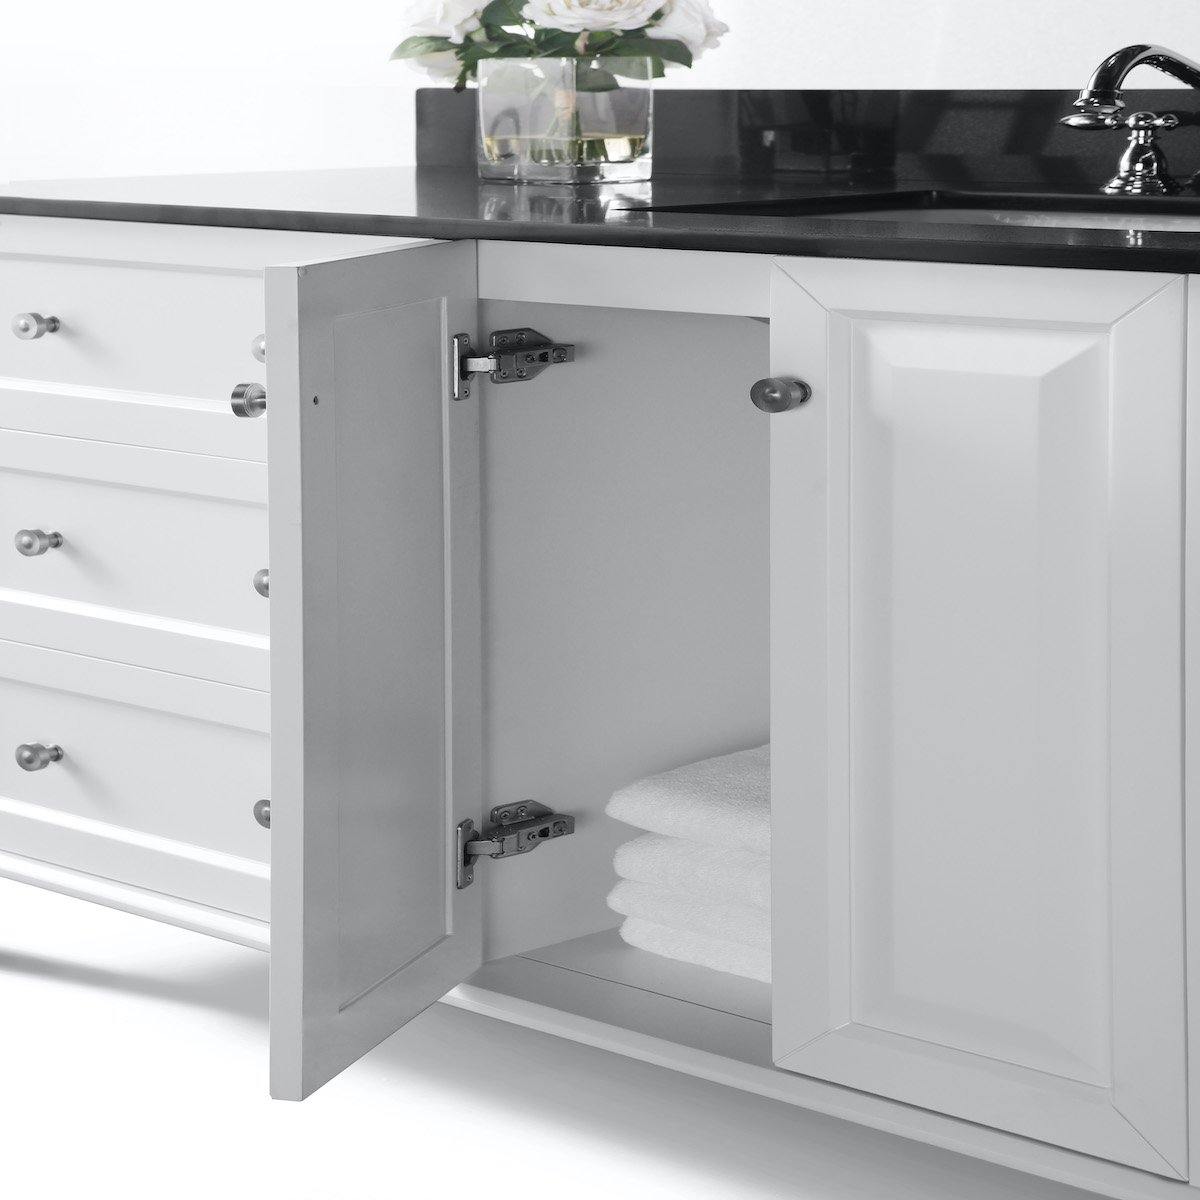 Ancerre Designs Hannah 48 Inch White Single Vanity with Right Basin and Nickel Hardware Inside Cabinet